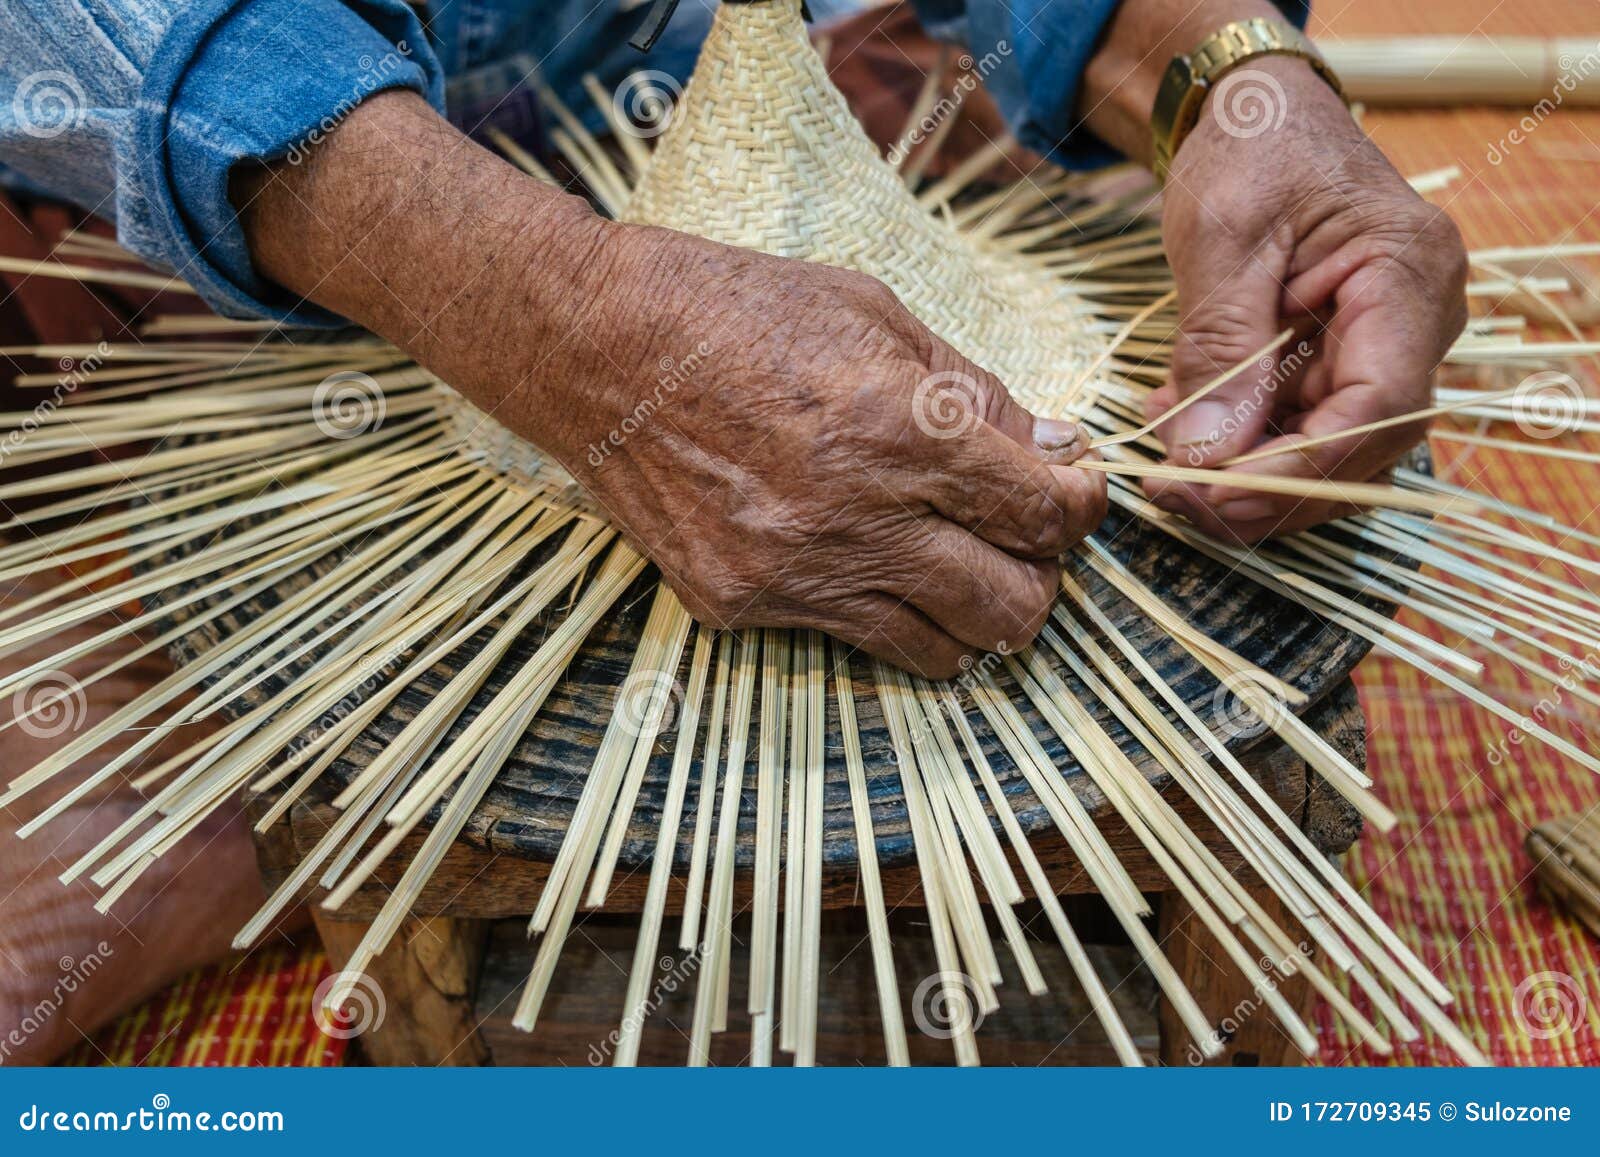 Hands of Craftsman Weaving Rattan and Bamboo To Make Traditional Thai ...